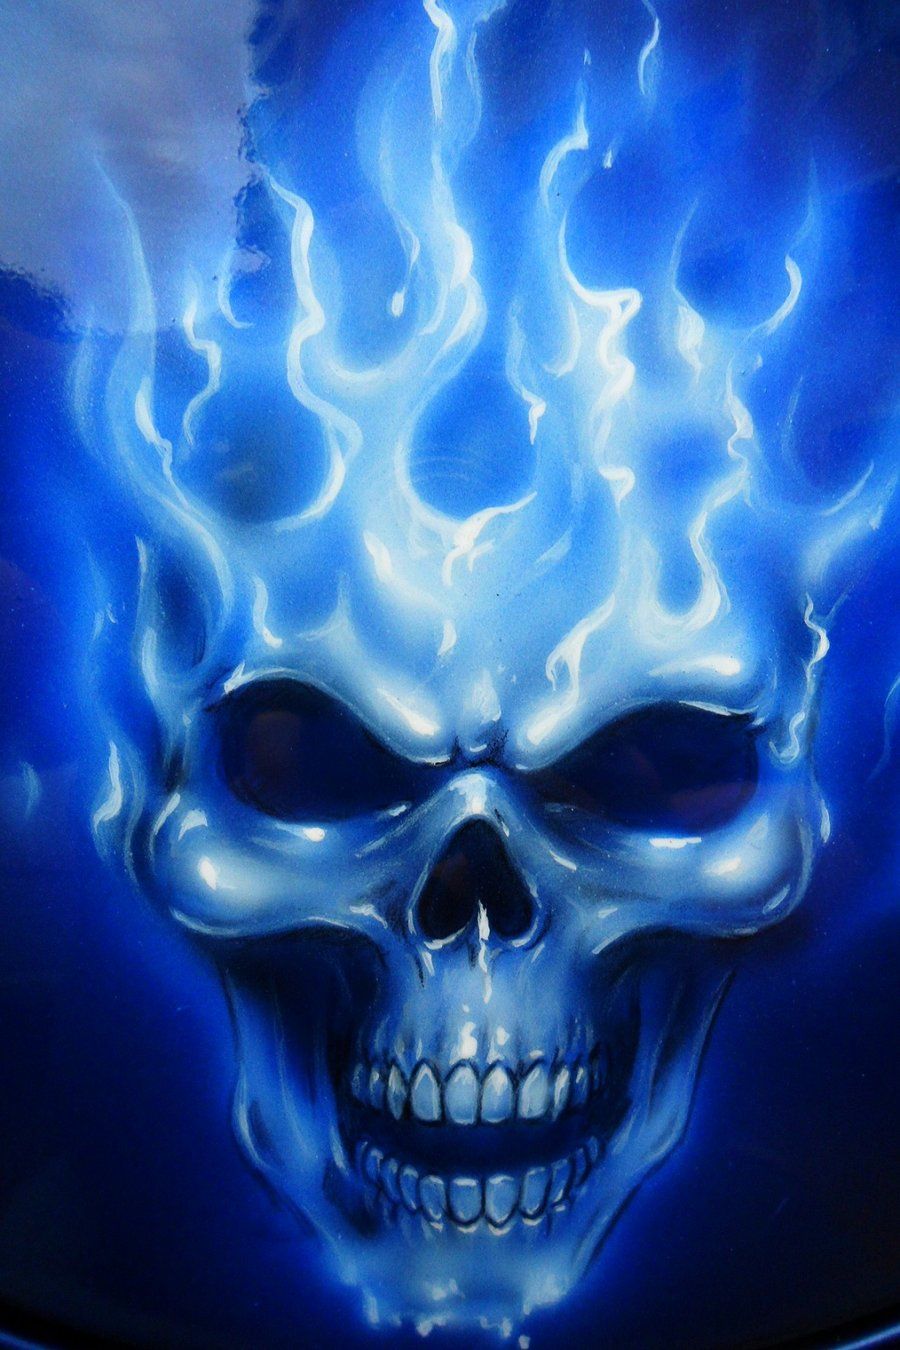 Skull Drawings With Blue Flames Image Pictures Nearpics